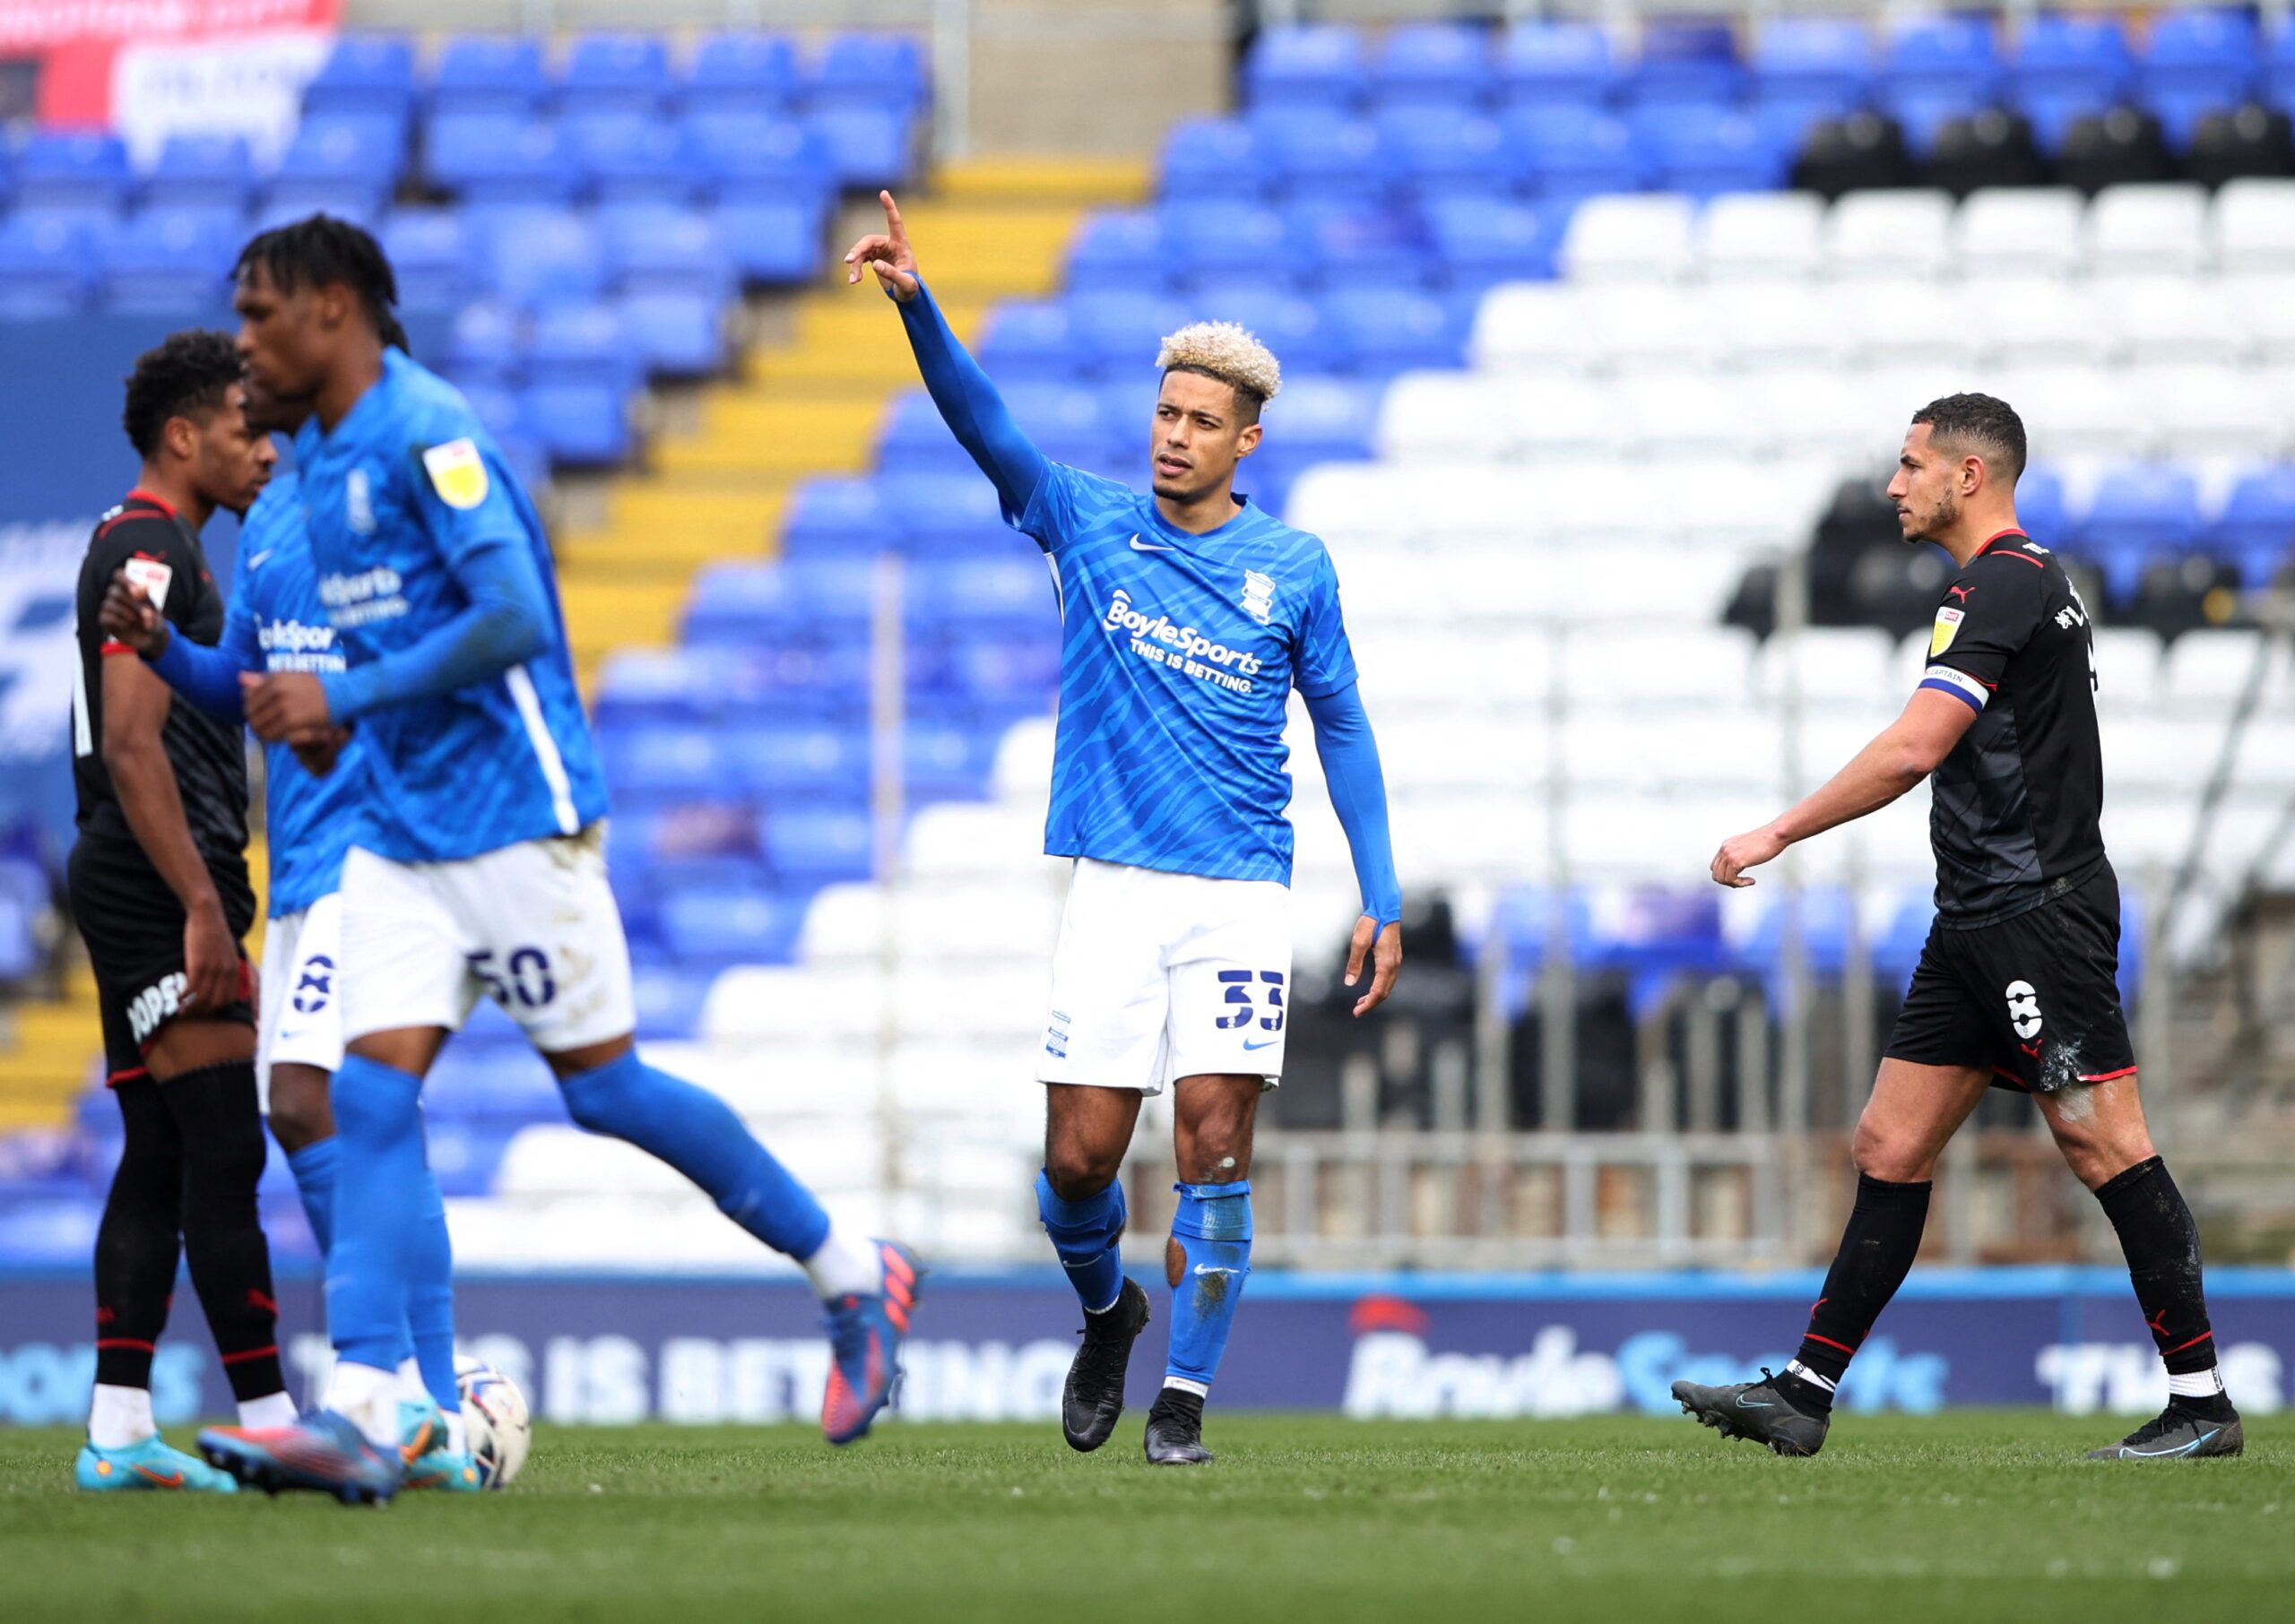 Soccer Football - Championship - Birmingham City v West Bromwich Albion - St Andrew's, Birmingham, Britain- April 3, 2022  Birmingham City's Lyle Taylor celebrates scoring their first goal   Action Images/Molly Darlington  EDITORIAL USE ONLY. No use with unauthorized audio, video, data, fixture lists, club/league logos or 